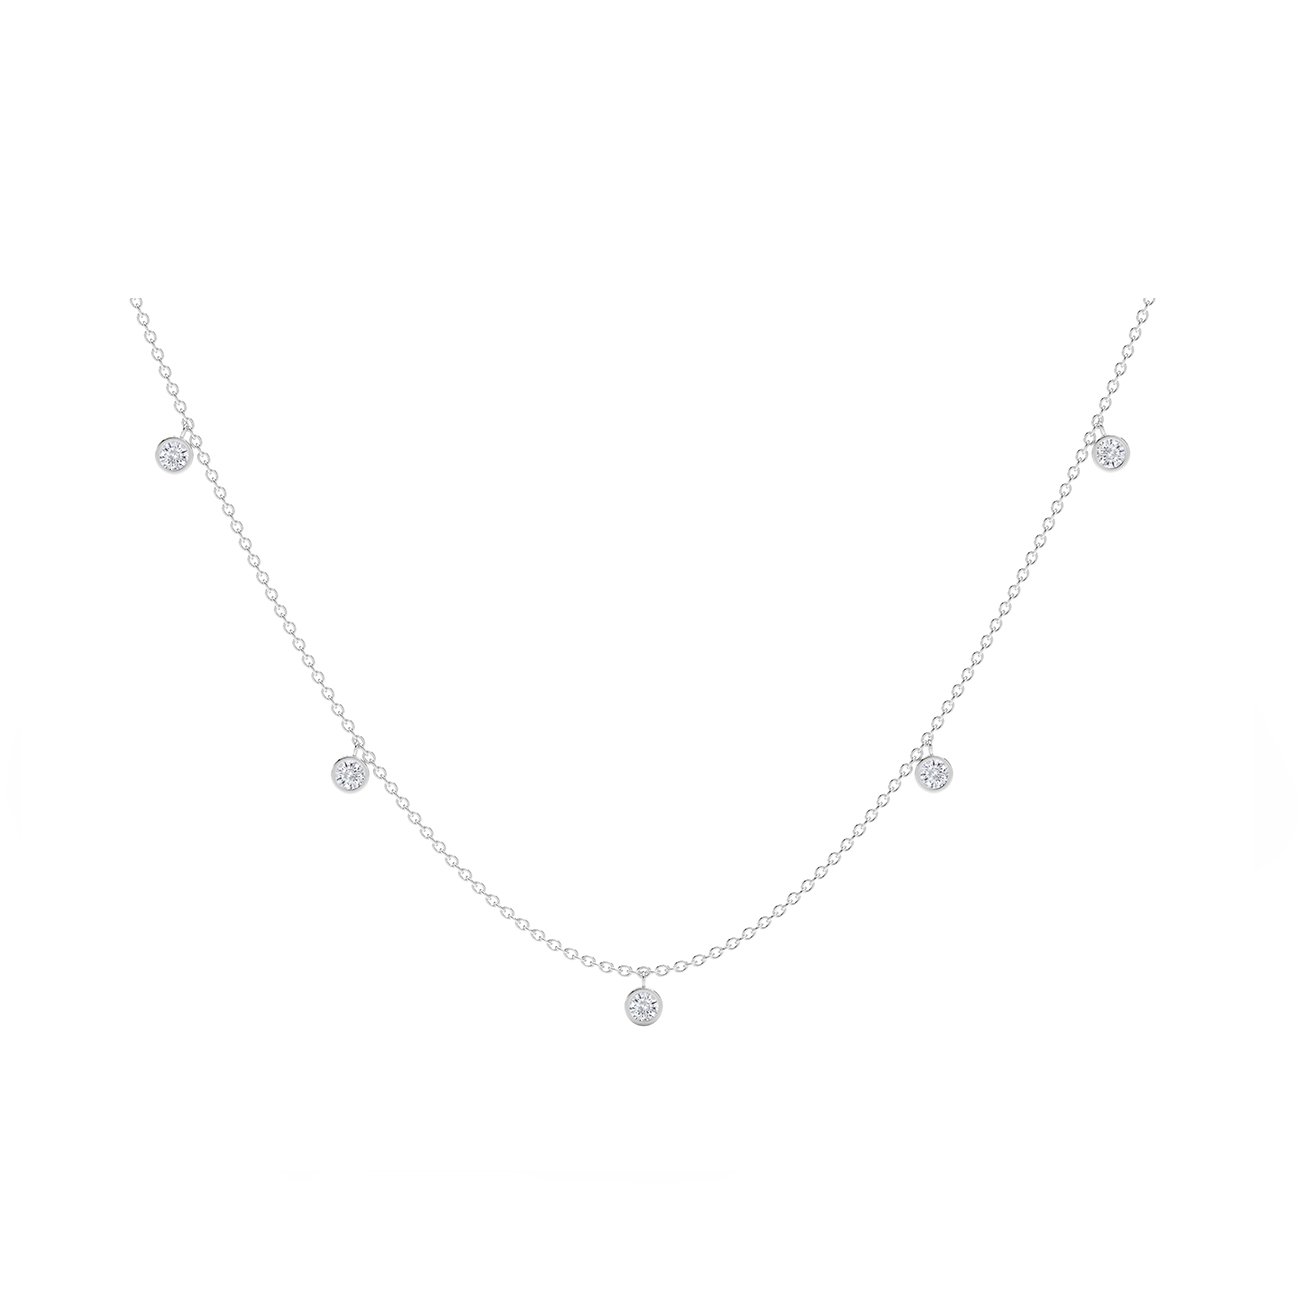 18K WHITE GOLD FOREVERMARK TRIBUTE COLLECTION DIAMOND NECKLACE LENGTH 16